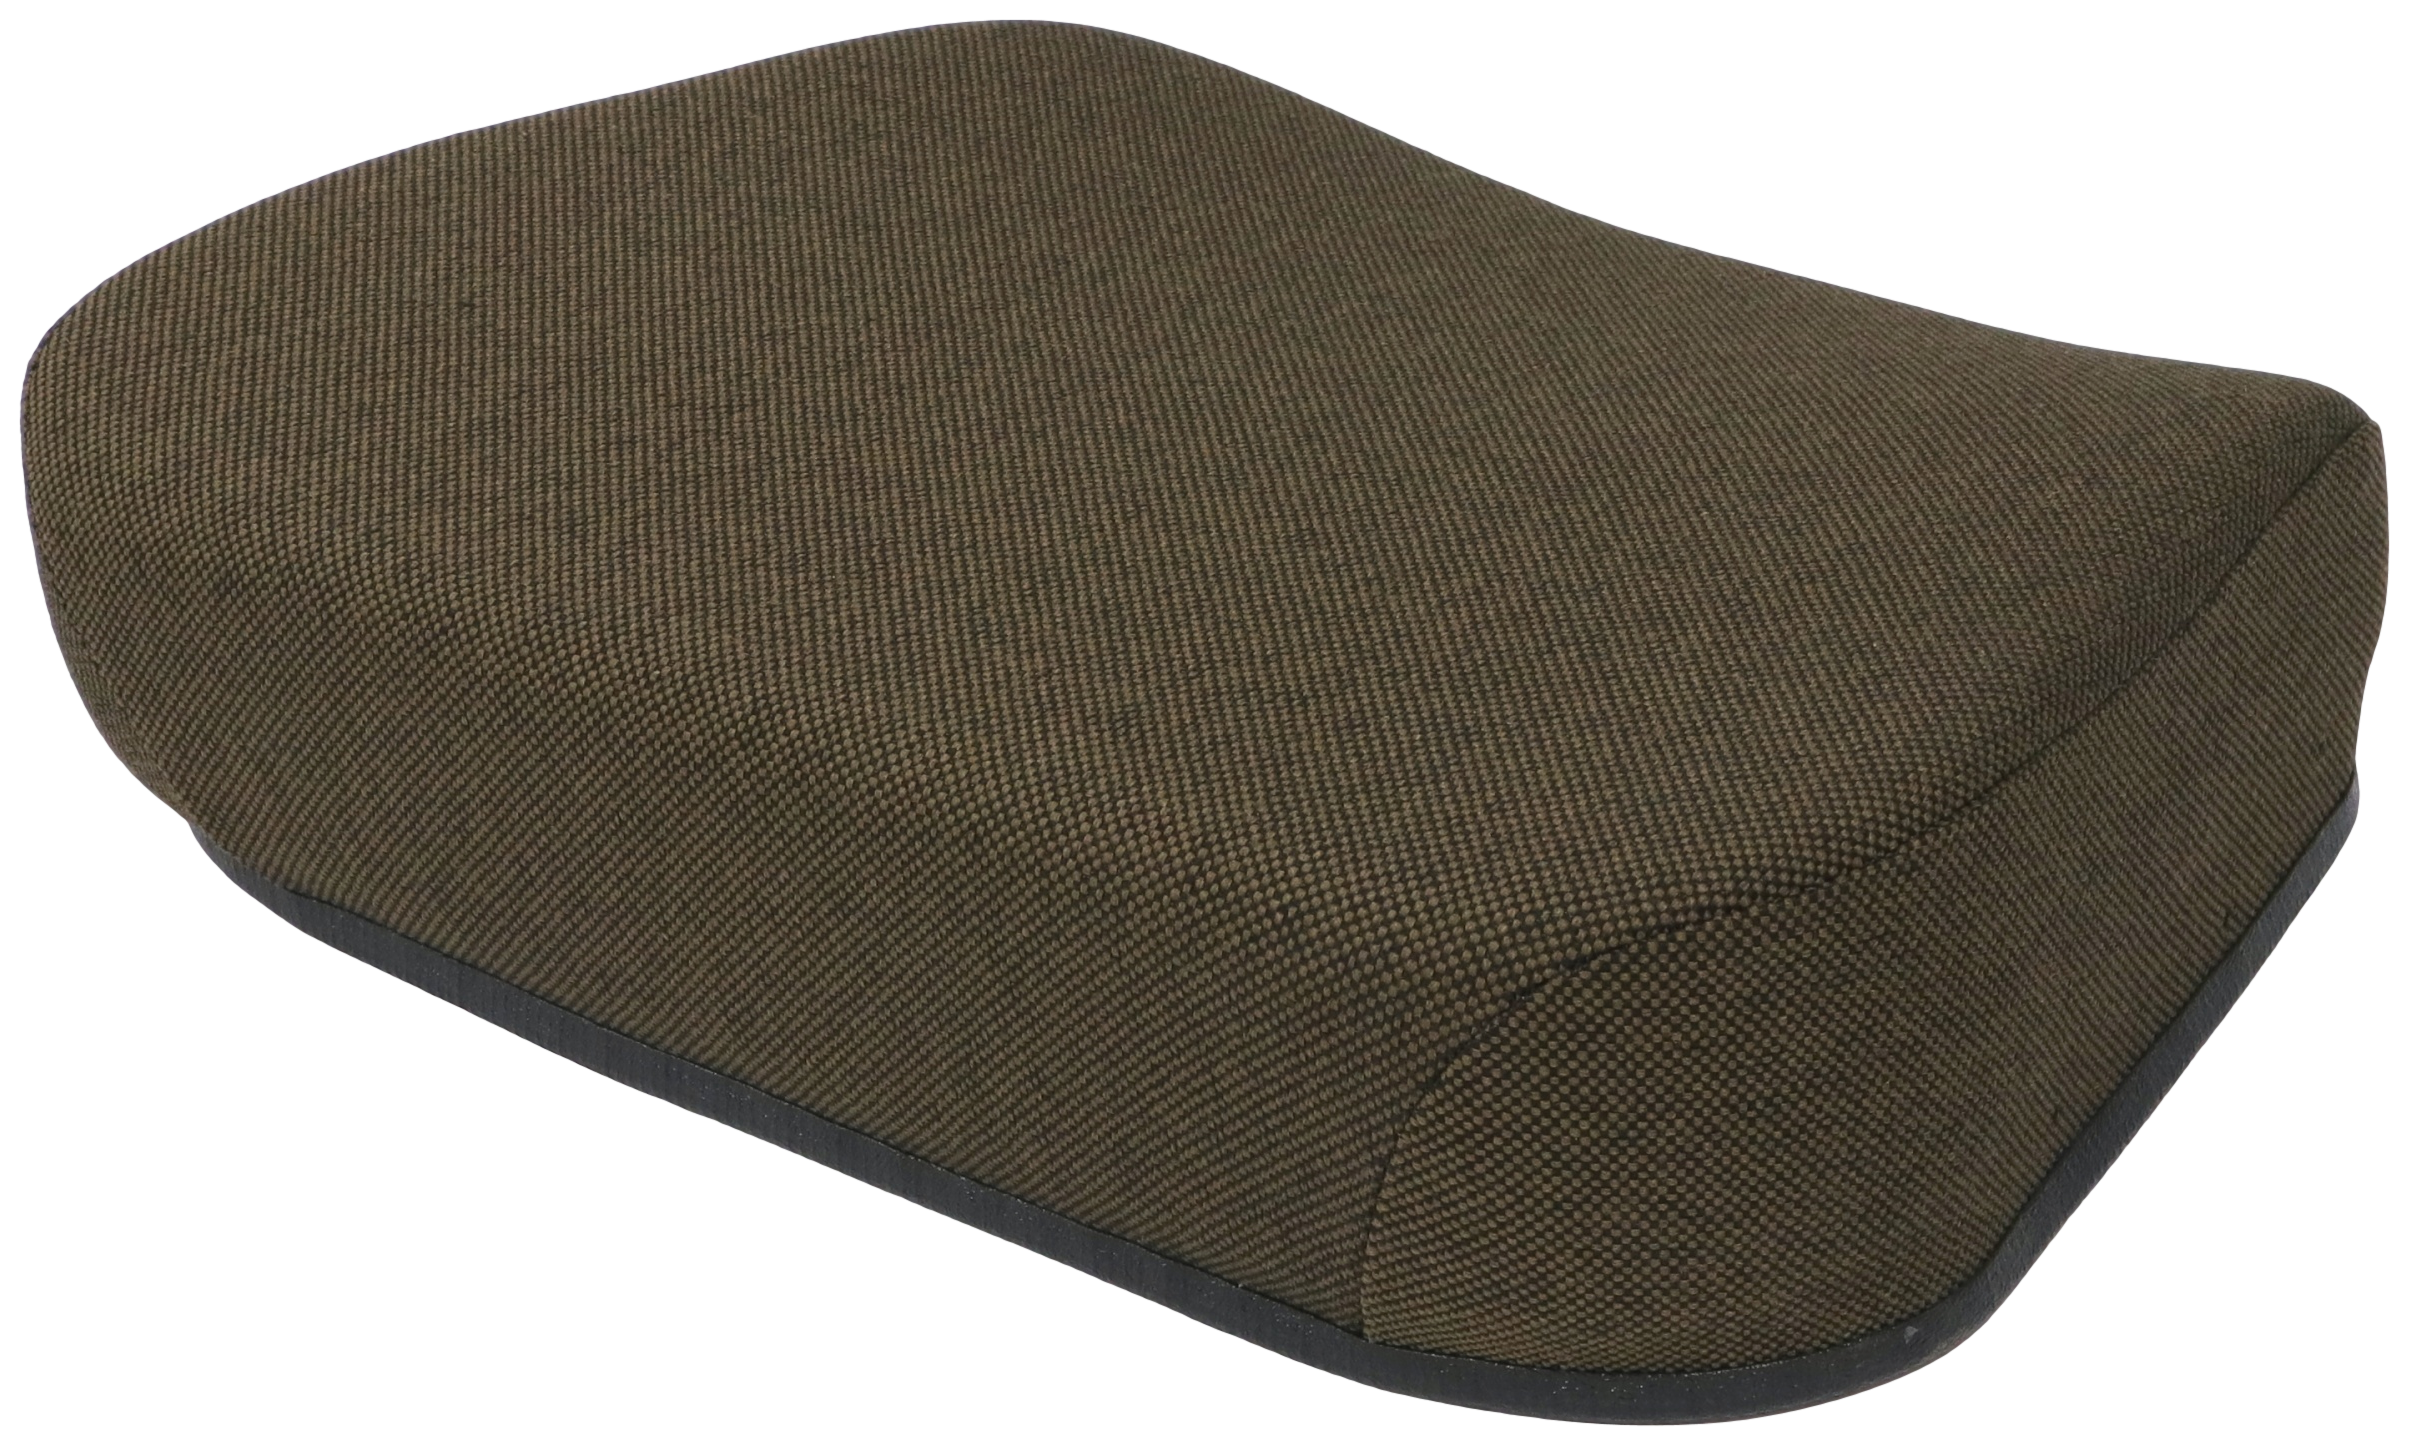 JD PERSONAL POSTURE SEAT - SEAT CUSHION (HYDRAULIC/AIR SUSPENSION)